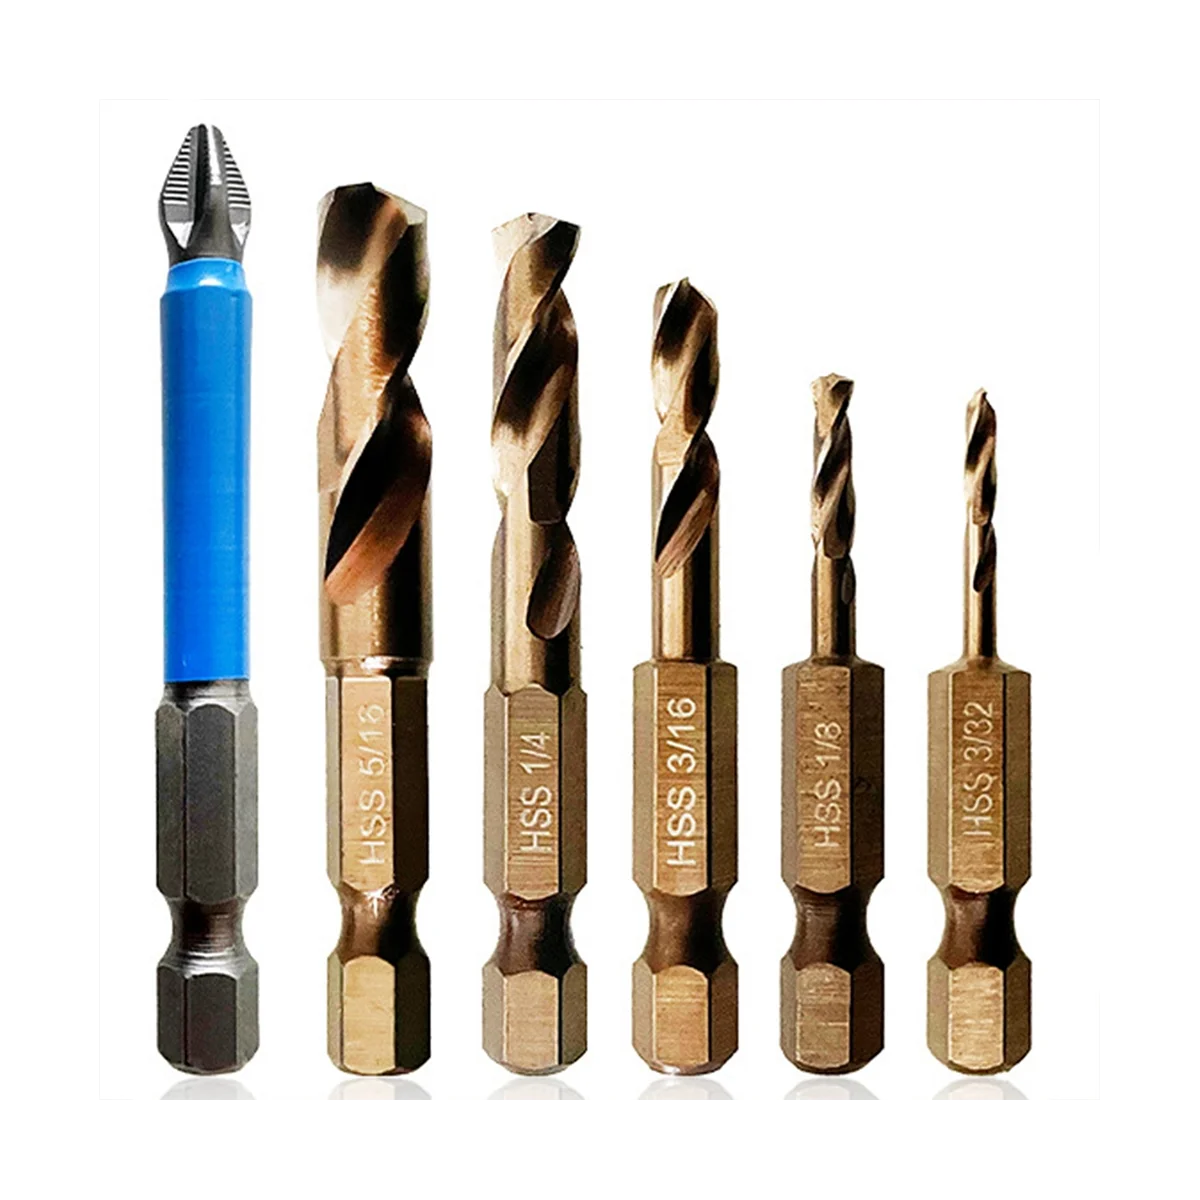 

6-Piece M35 Cobalt Stubby Drill Bit Set for Stainless Steel & Hard Metals for Quick Chucks & Impact Drivers